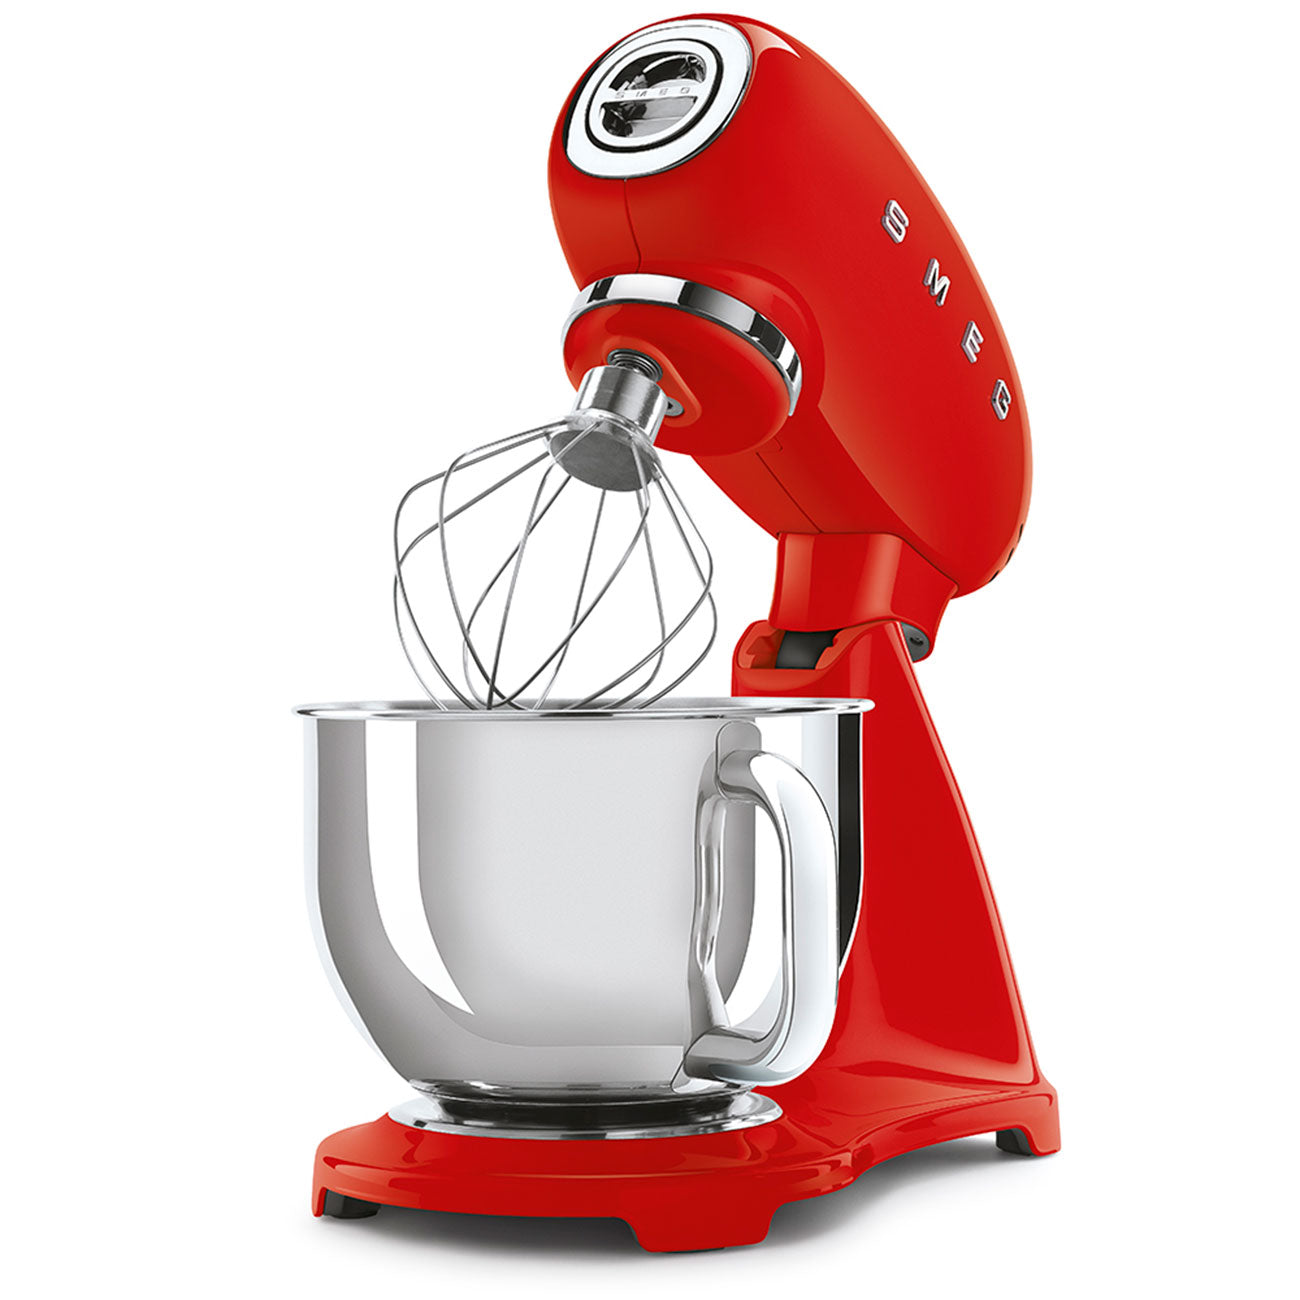 Smeg 50's Style 4.8L Stand Mixer Full Color Red SMF03RDSA